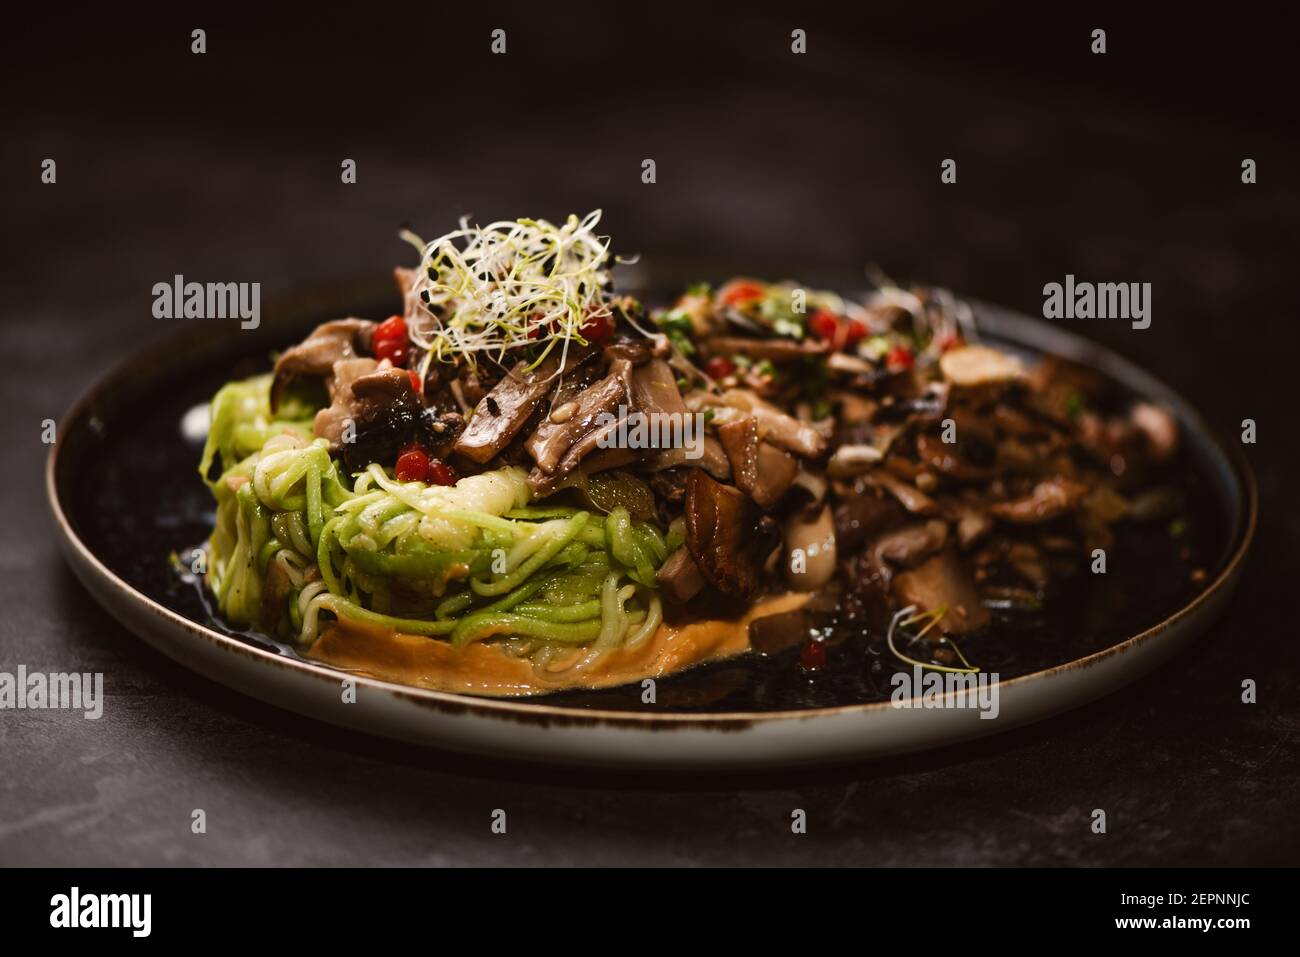 Yummy vegan dish with zucchini spaghetti and sauteed mushroom slices covered with red berries and alfalfa sprouts on dark background Stock Photo